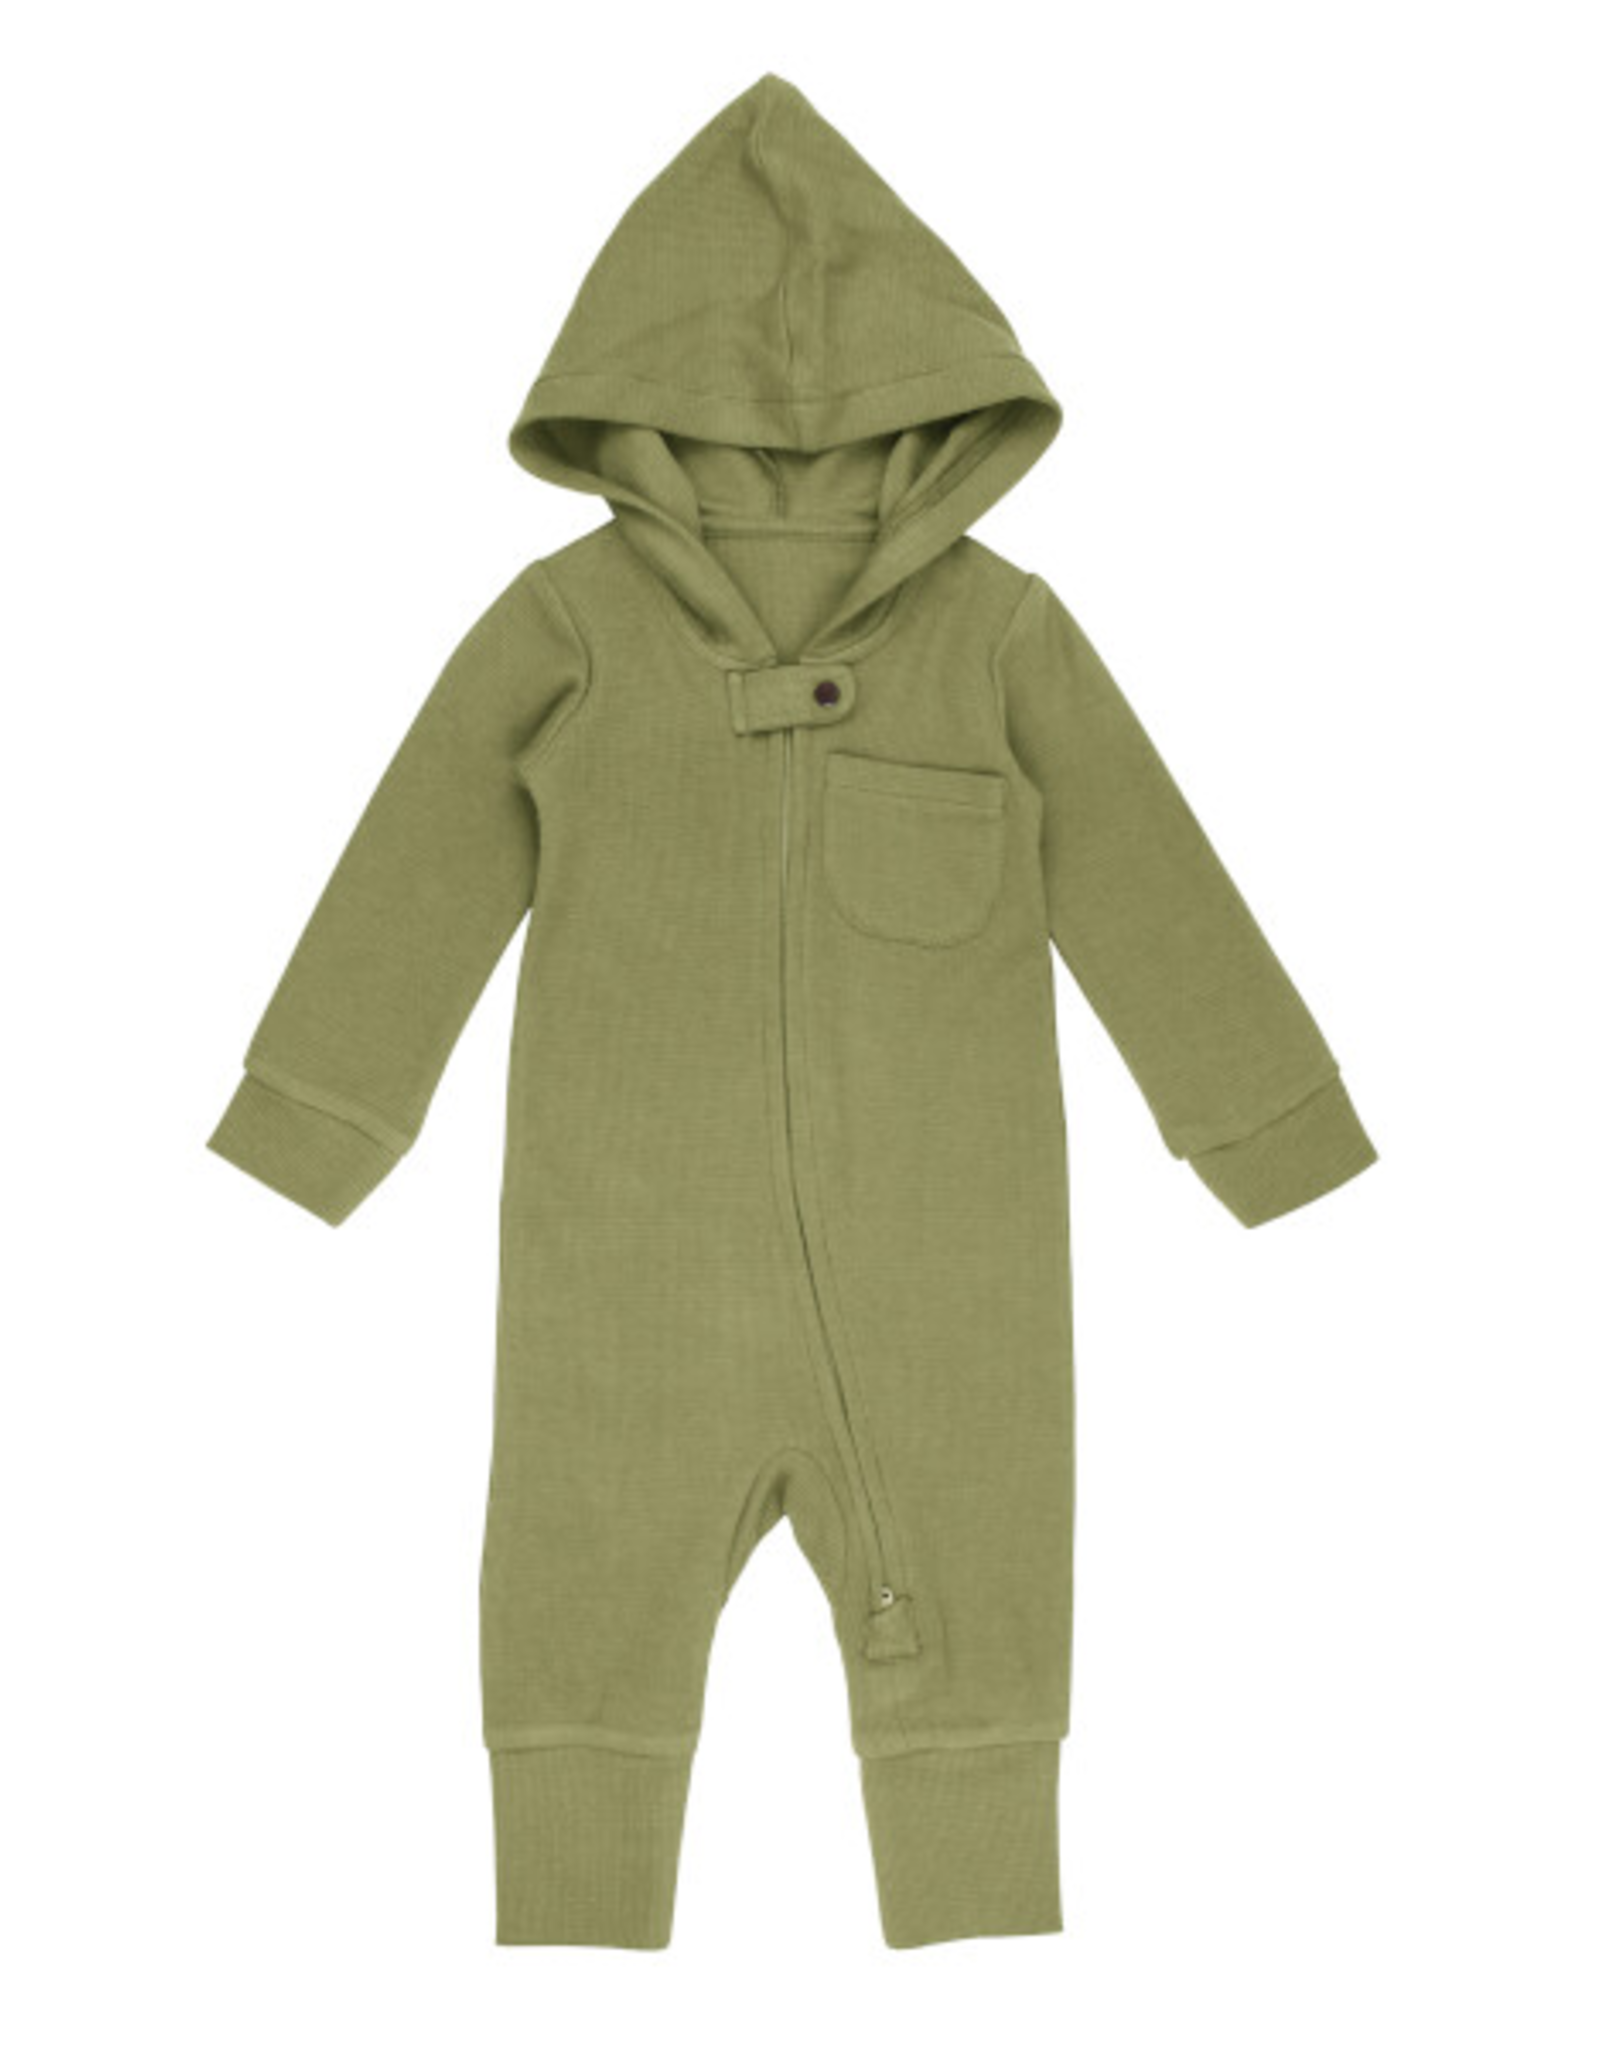 L'oved Baby Thermal Hooded Zipper Romper Sage - 18-24m